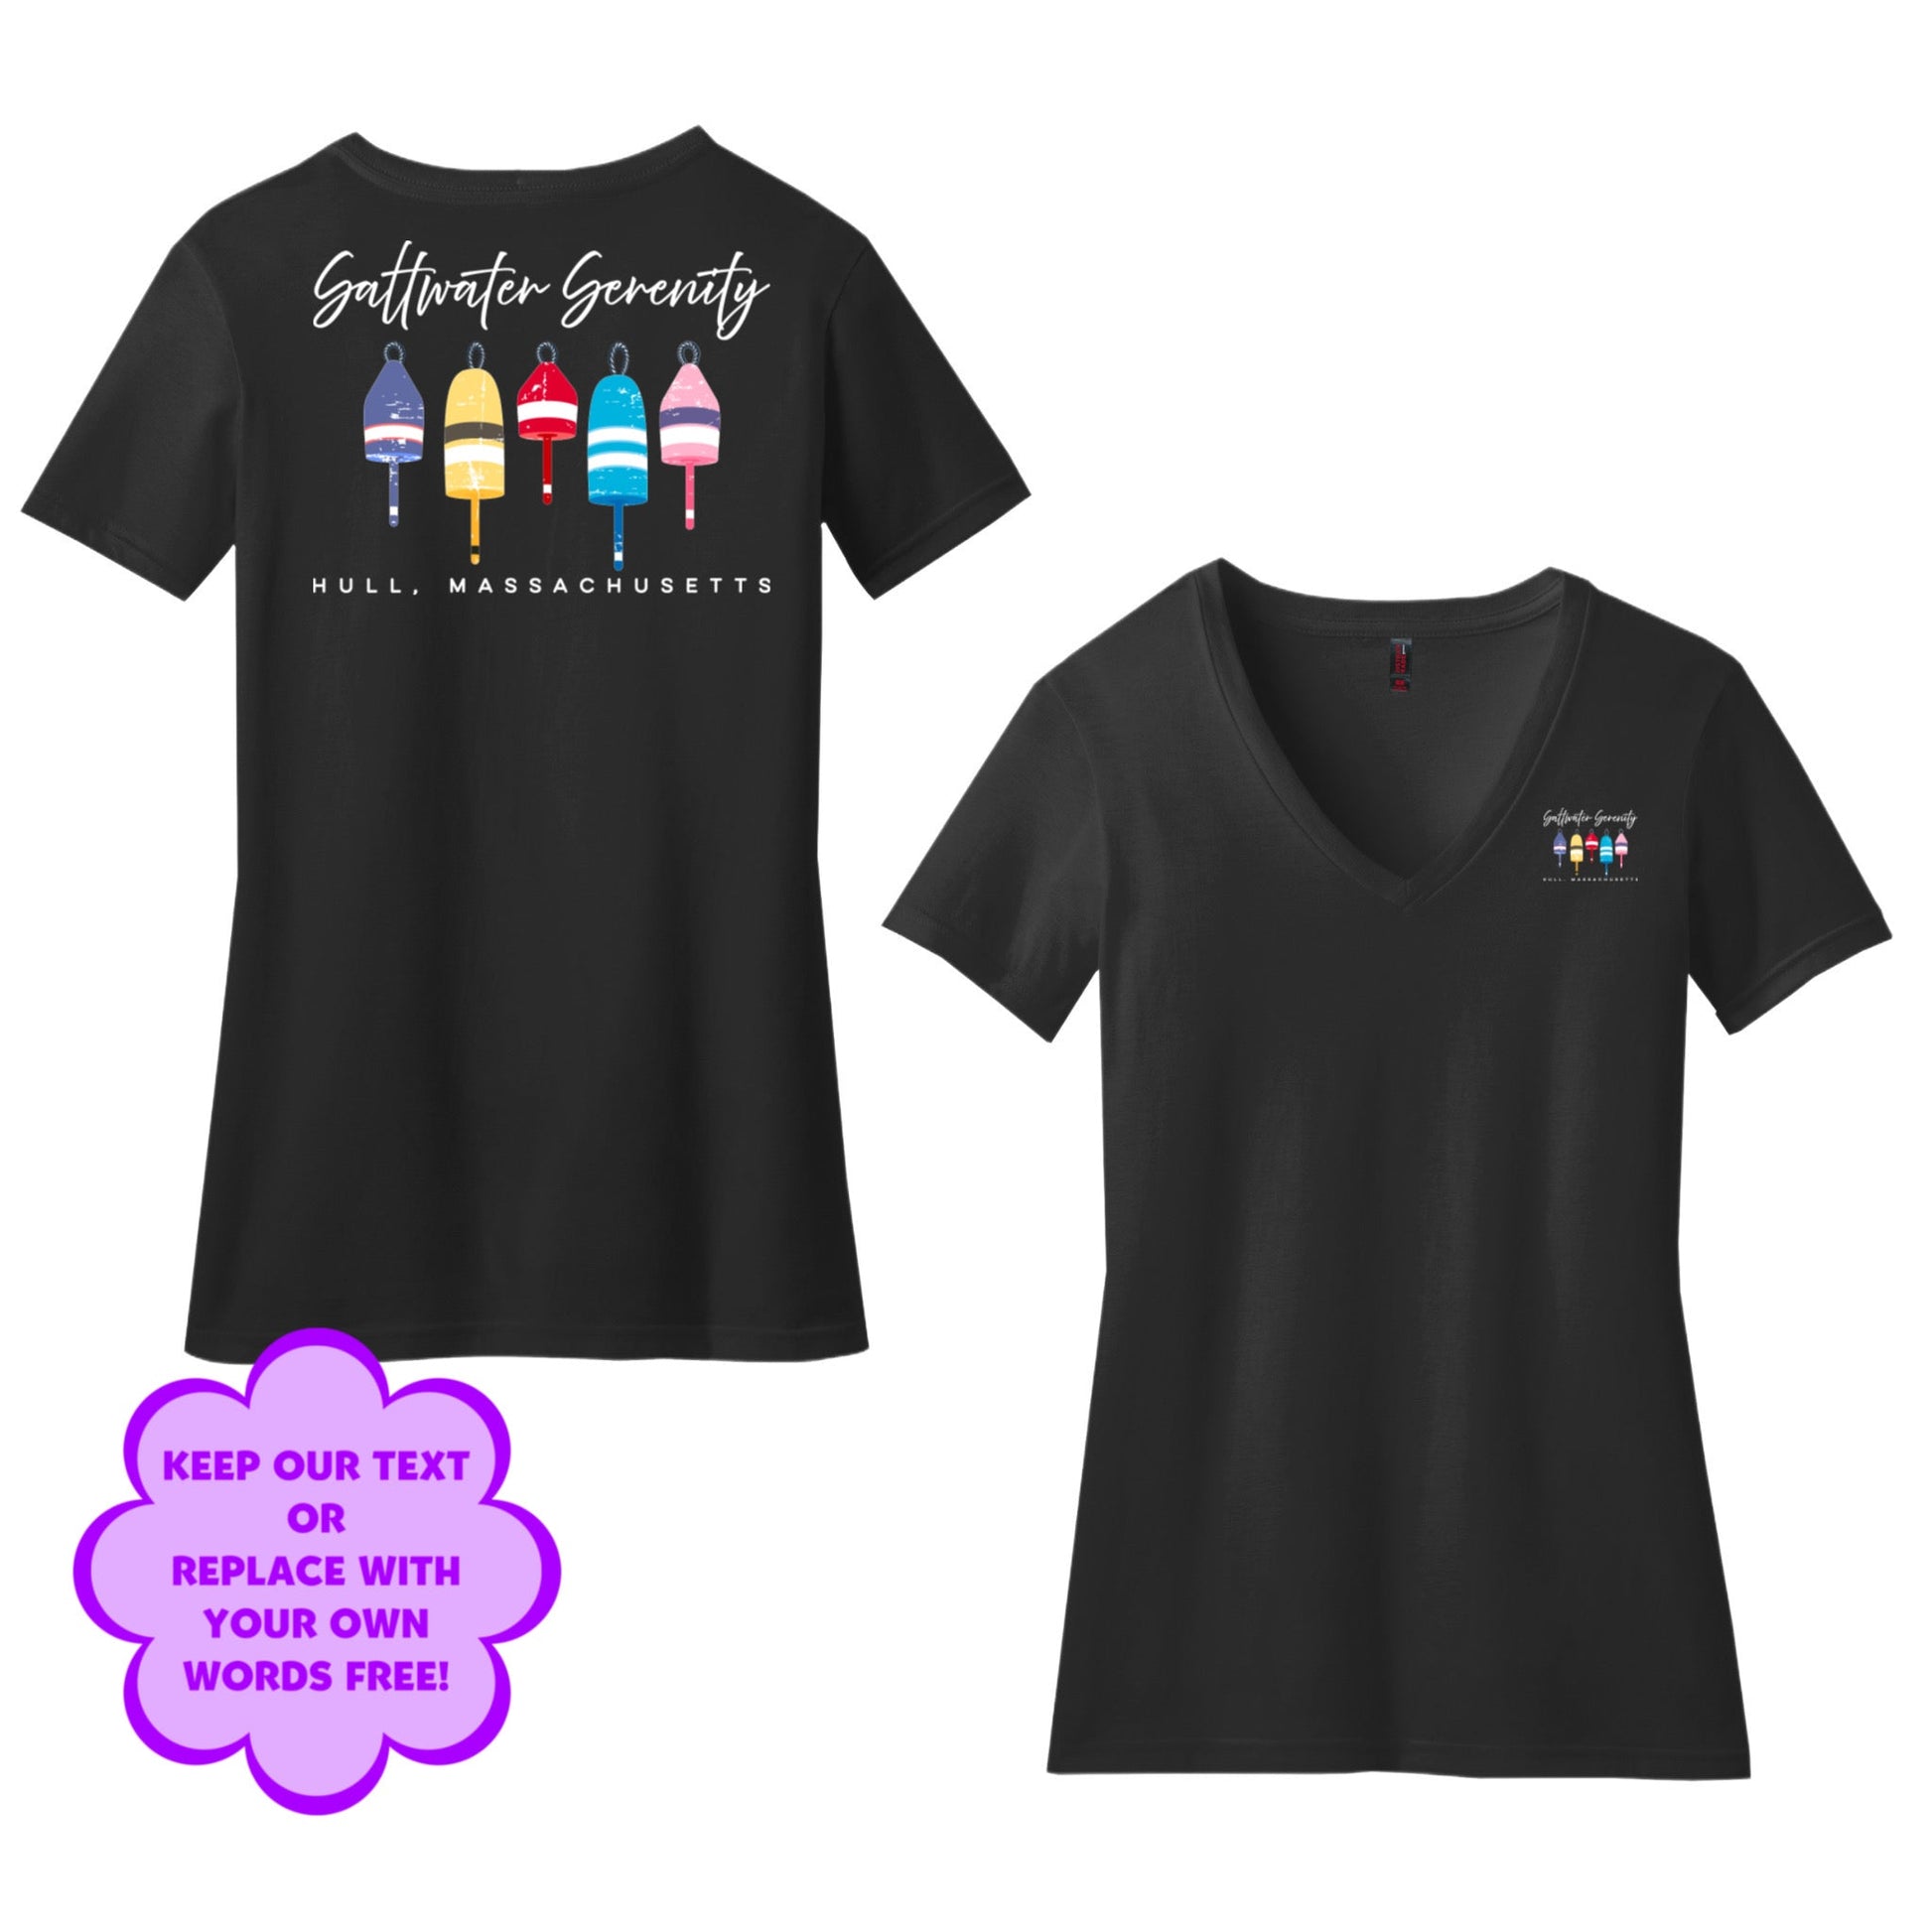 Personalize Free Boat Buoys, Hull, Women’s Cotton Tees from Baby Squid Ink 